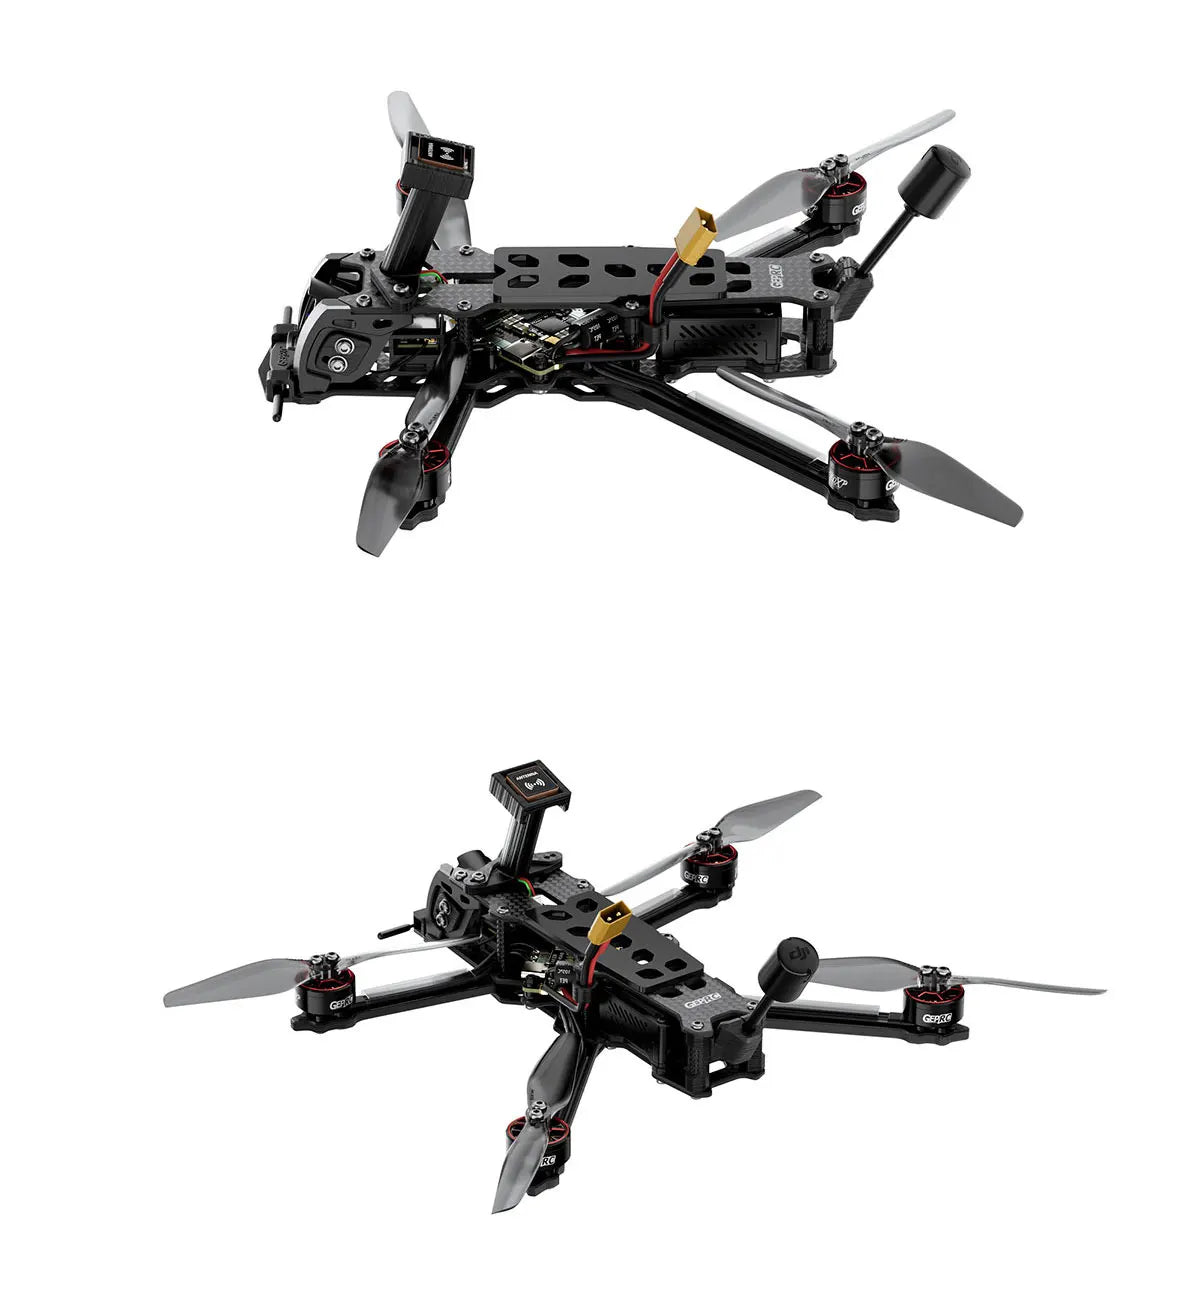 GEPRC Tern-LR40 HD Wasp Long Range FPV, lfthe parcel is returned to us due to the buyer's refusal to pay the